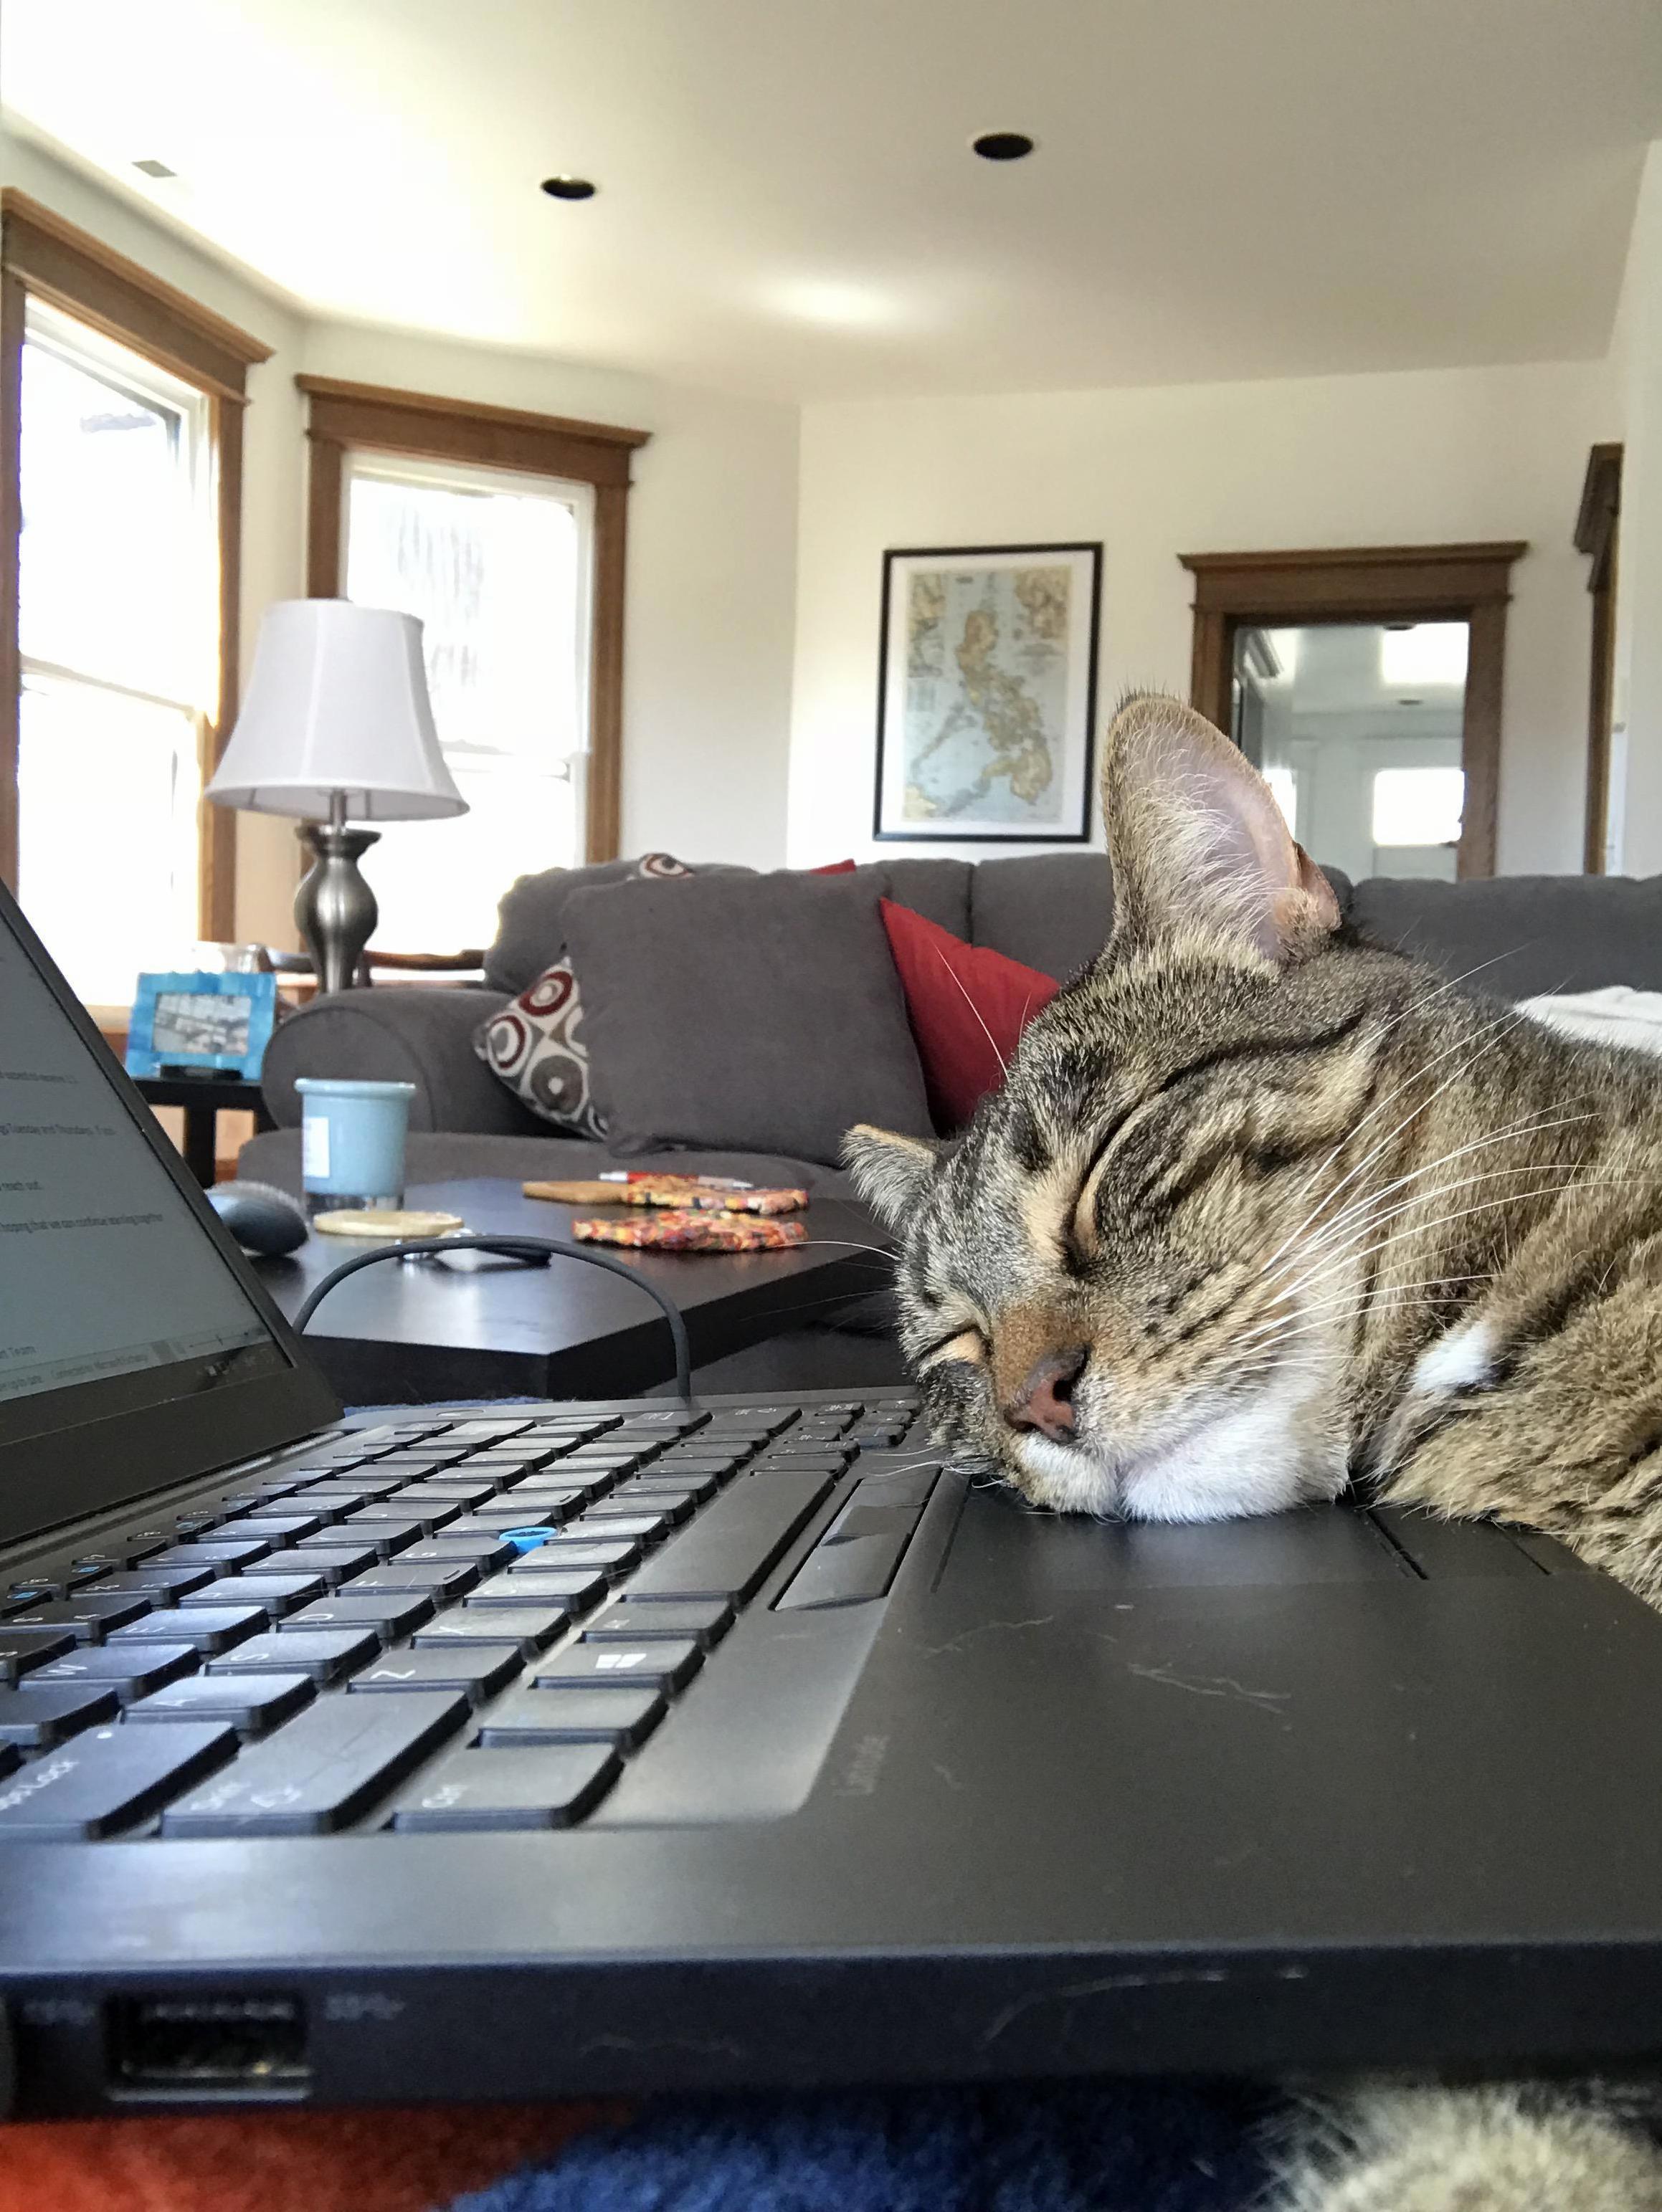 oh, youre working great, ill just take a nap right here.